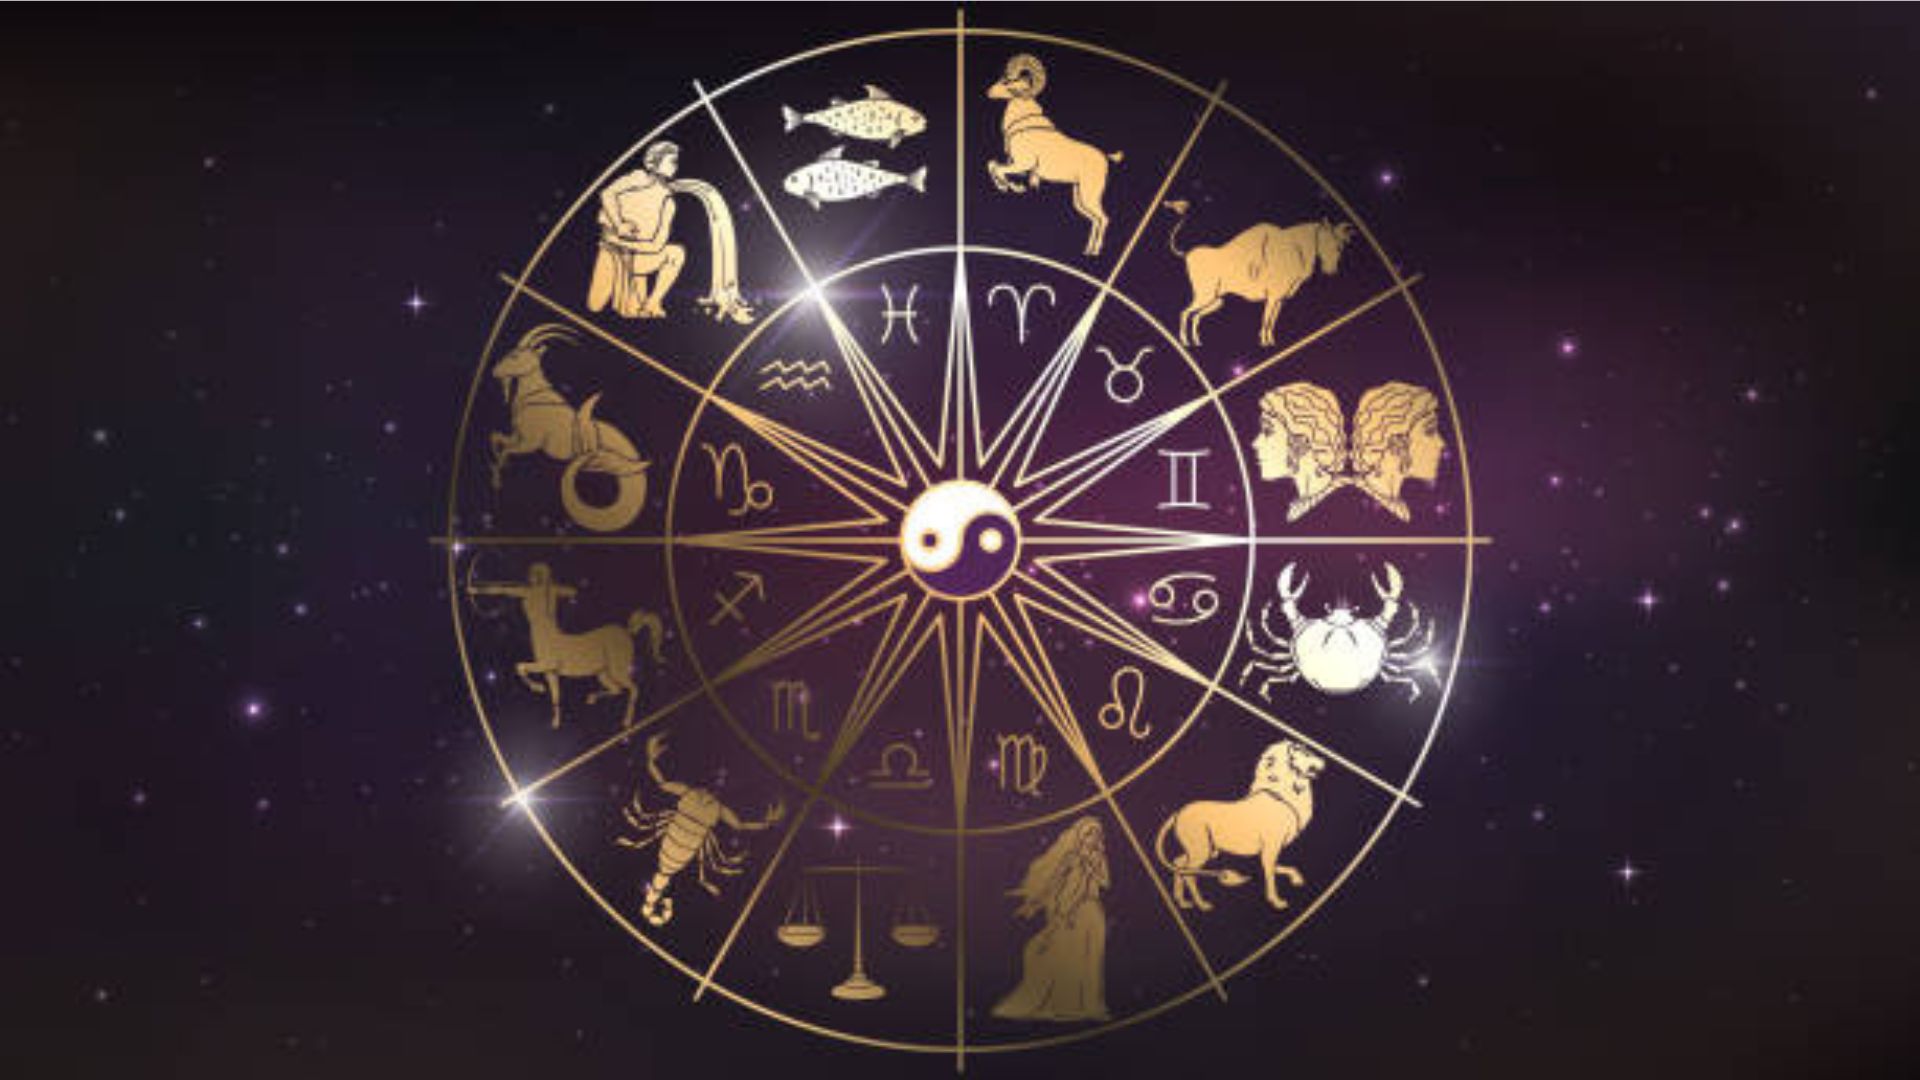 Zodiac Sings And Their Symbols In A Golden Color Circle